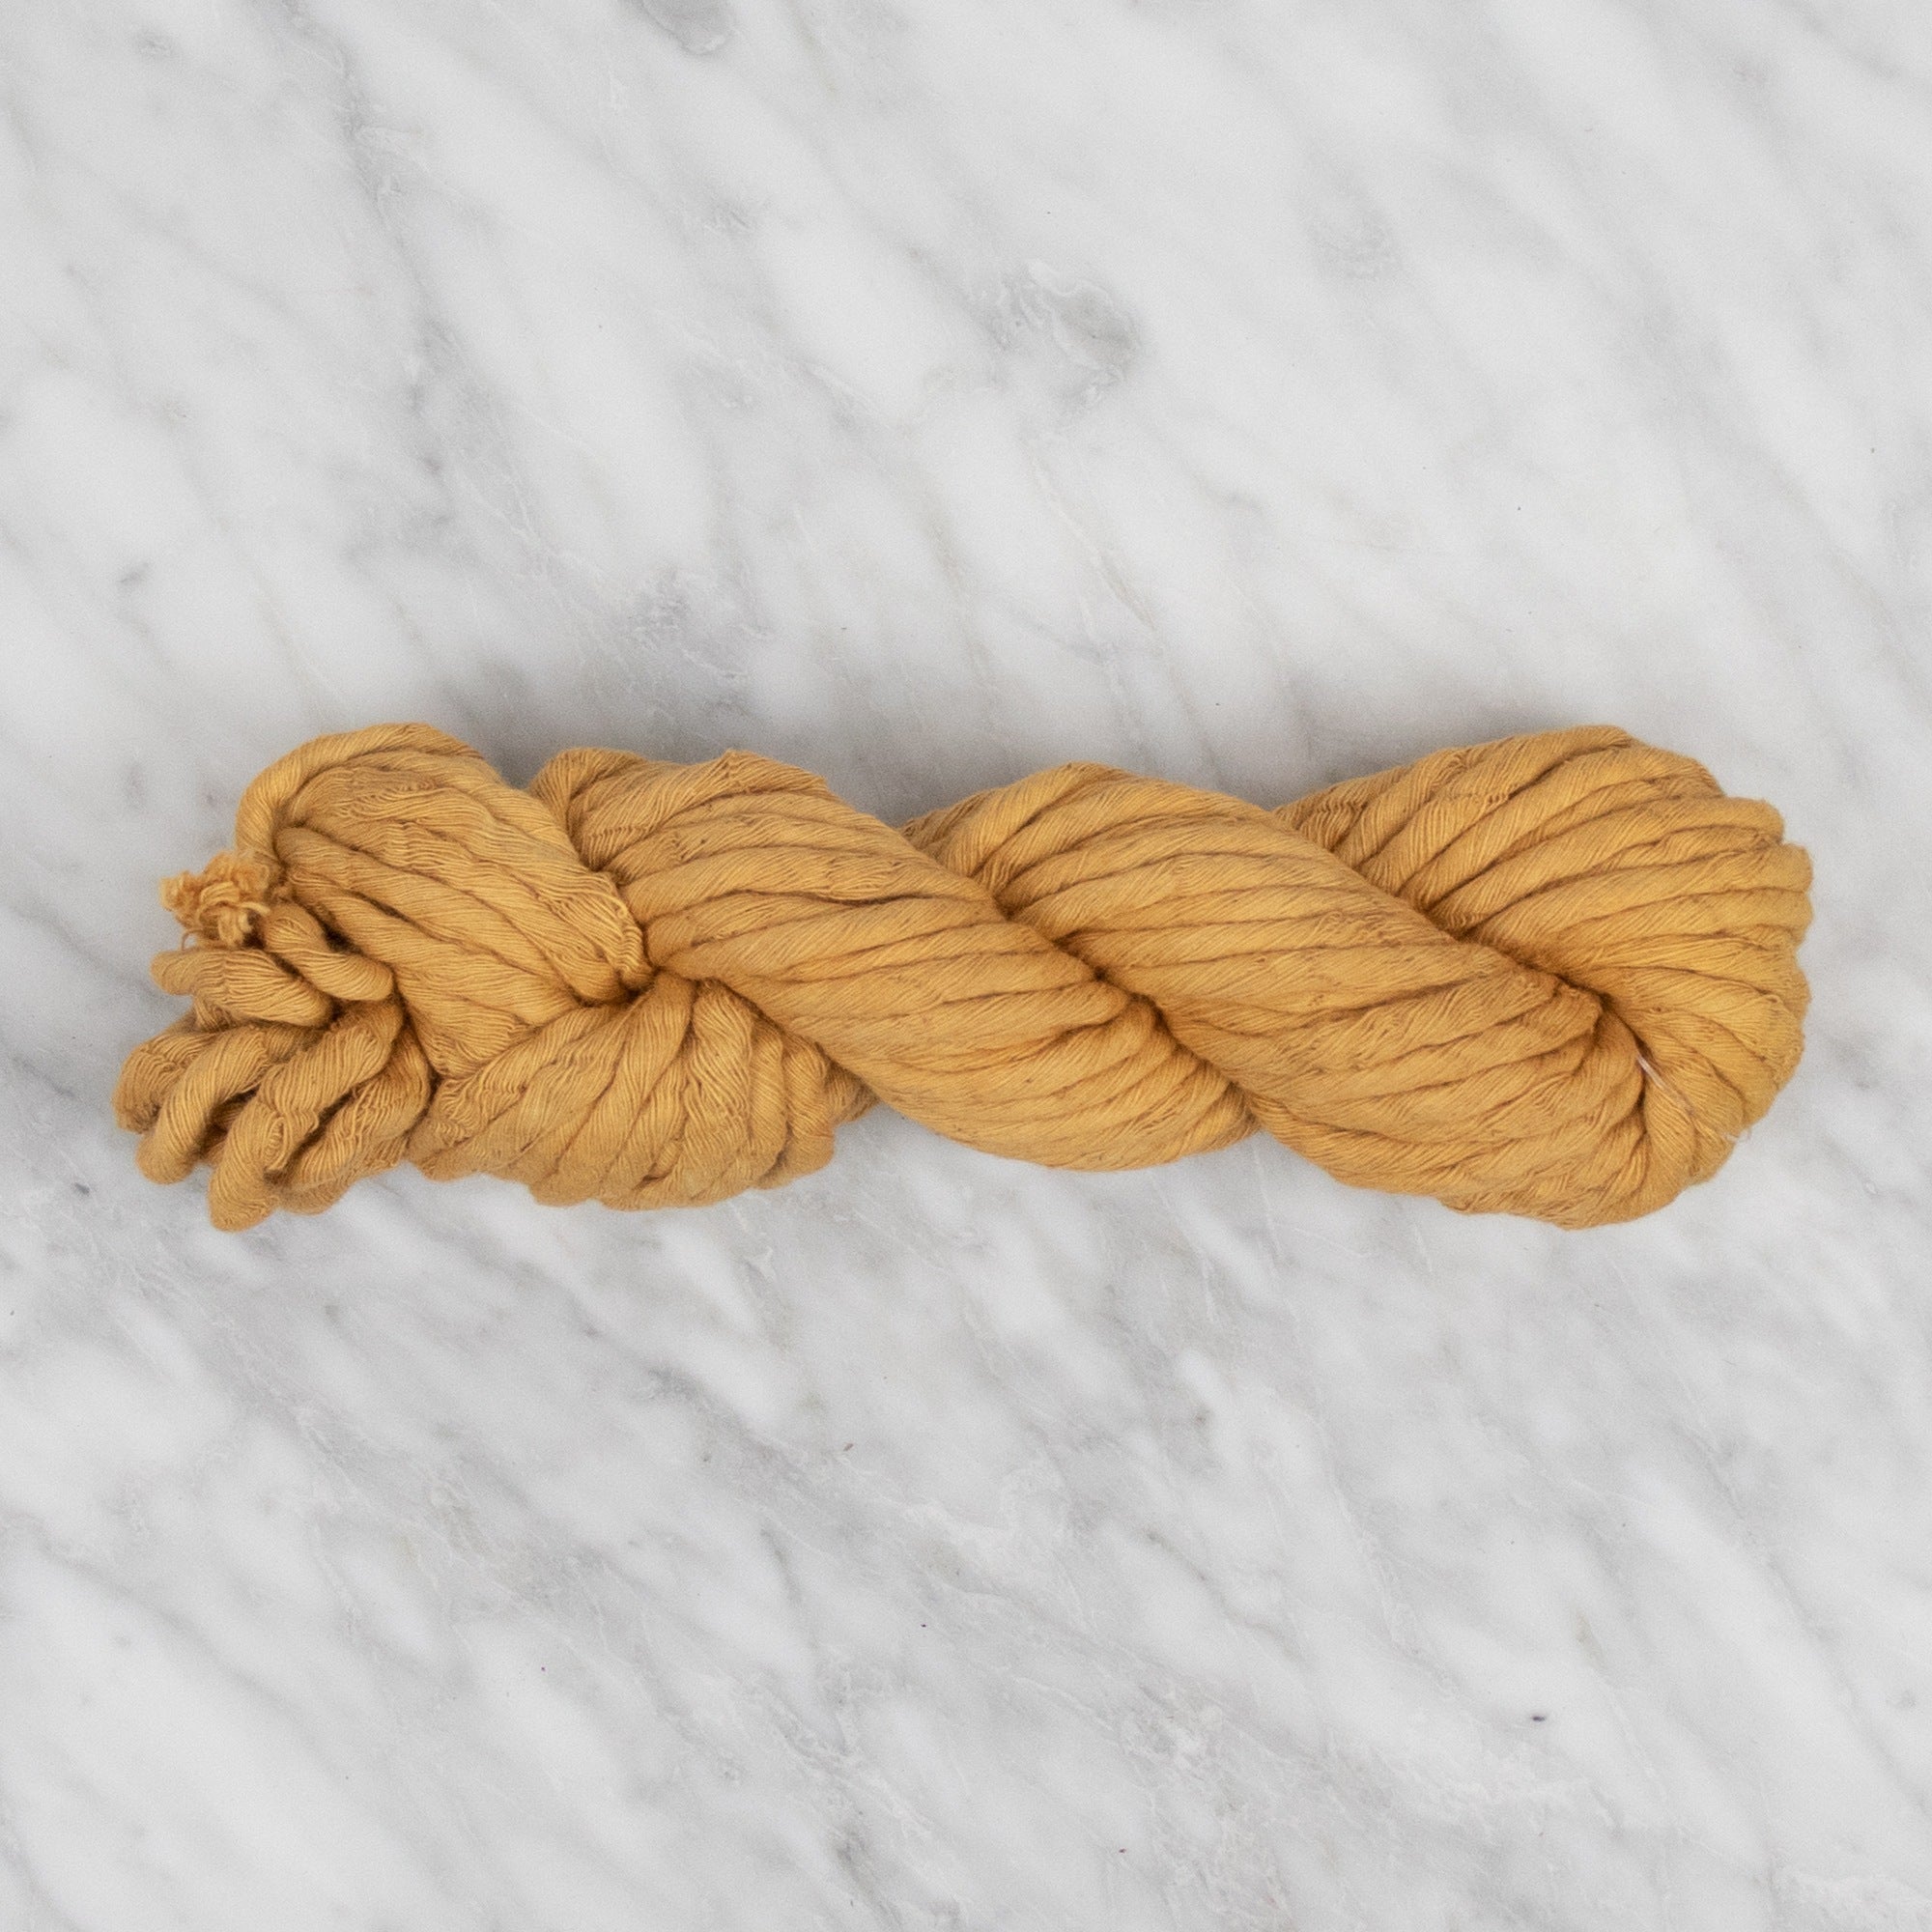 5mm Hand-Dyed Cotton String - Butternut - 100 grams